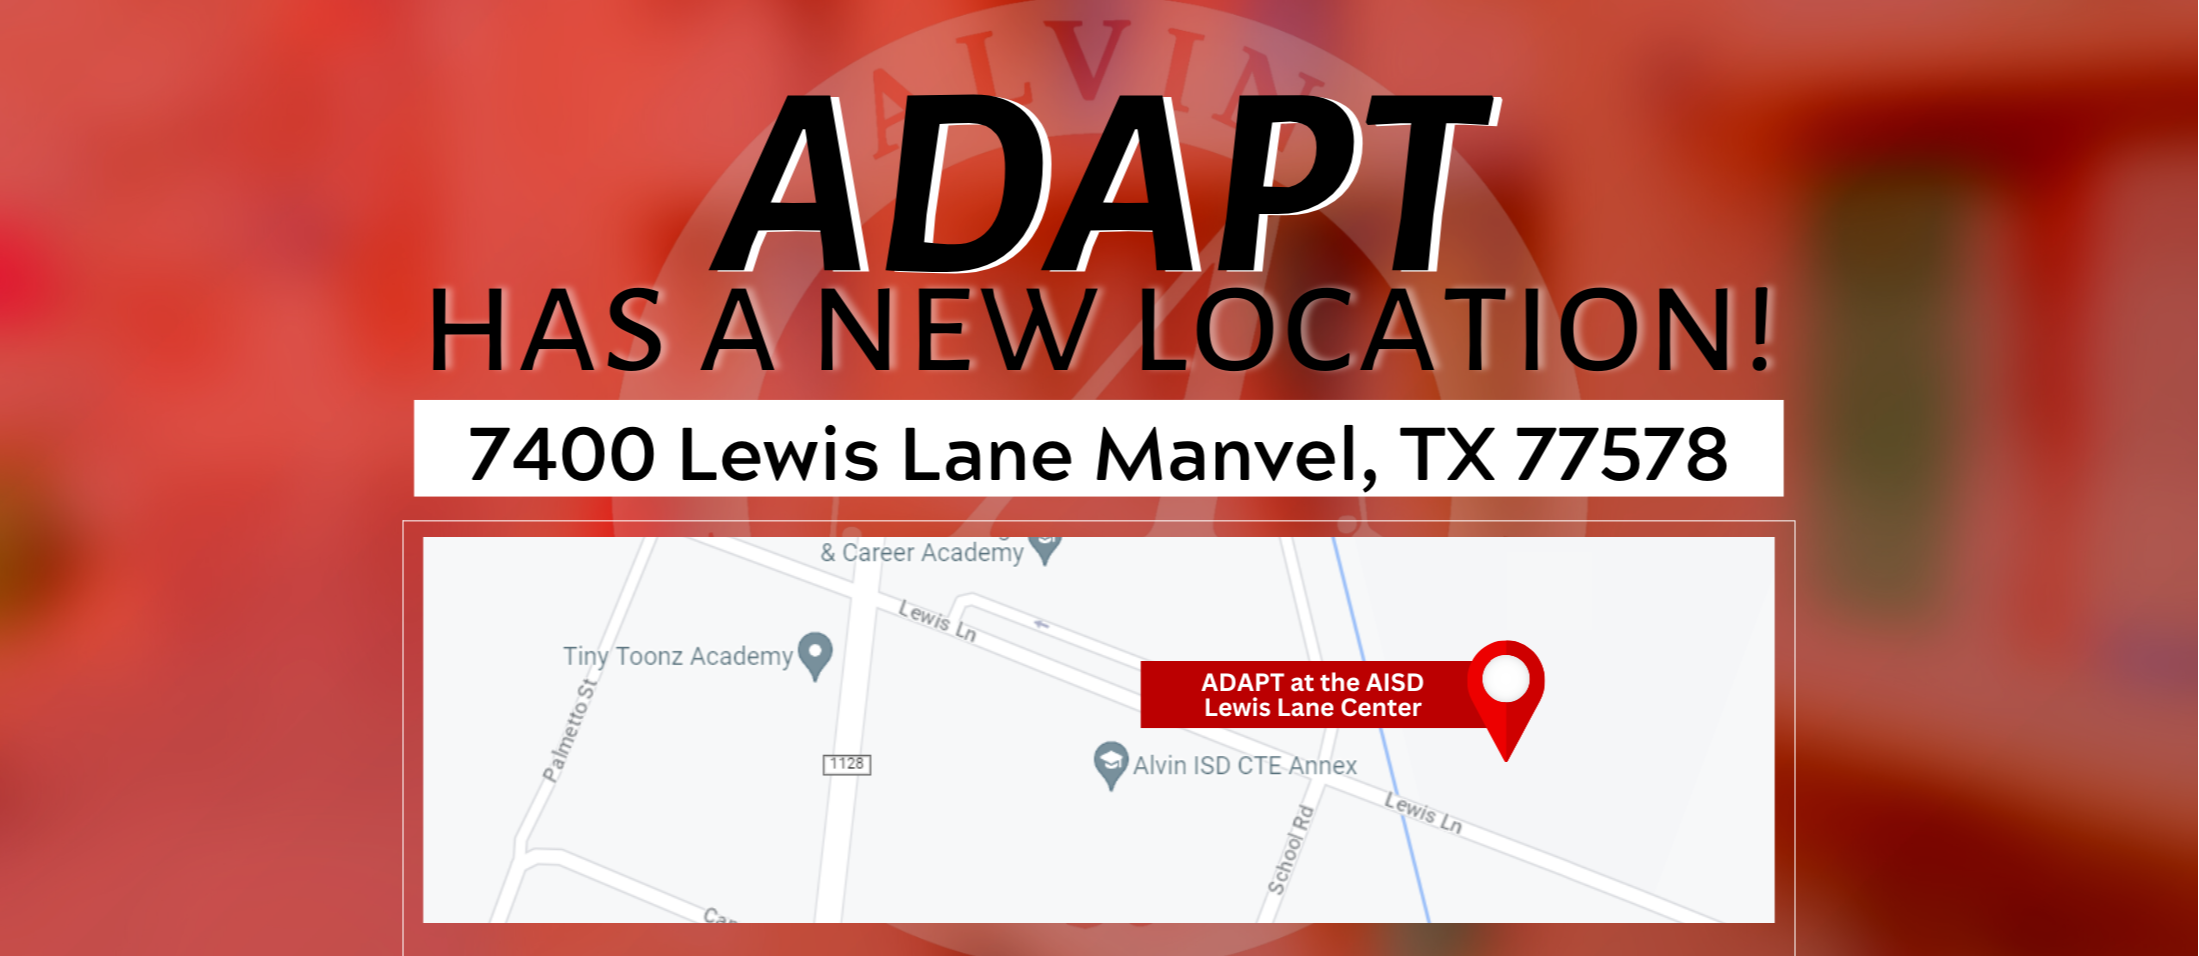 Adapt has a new location!